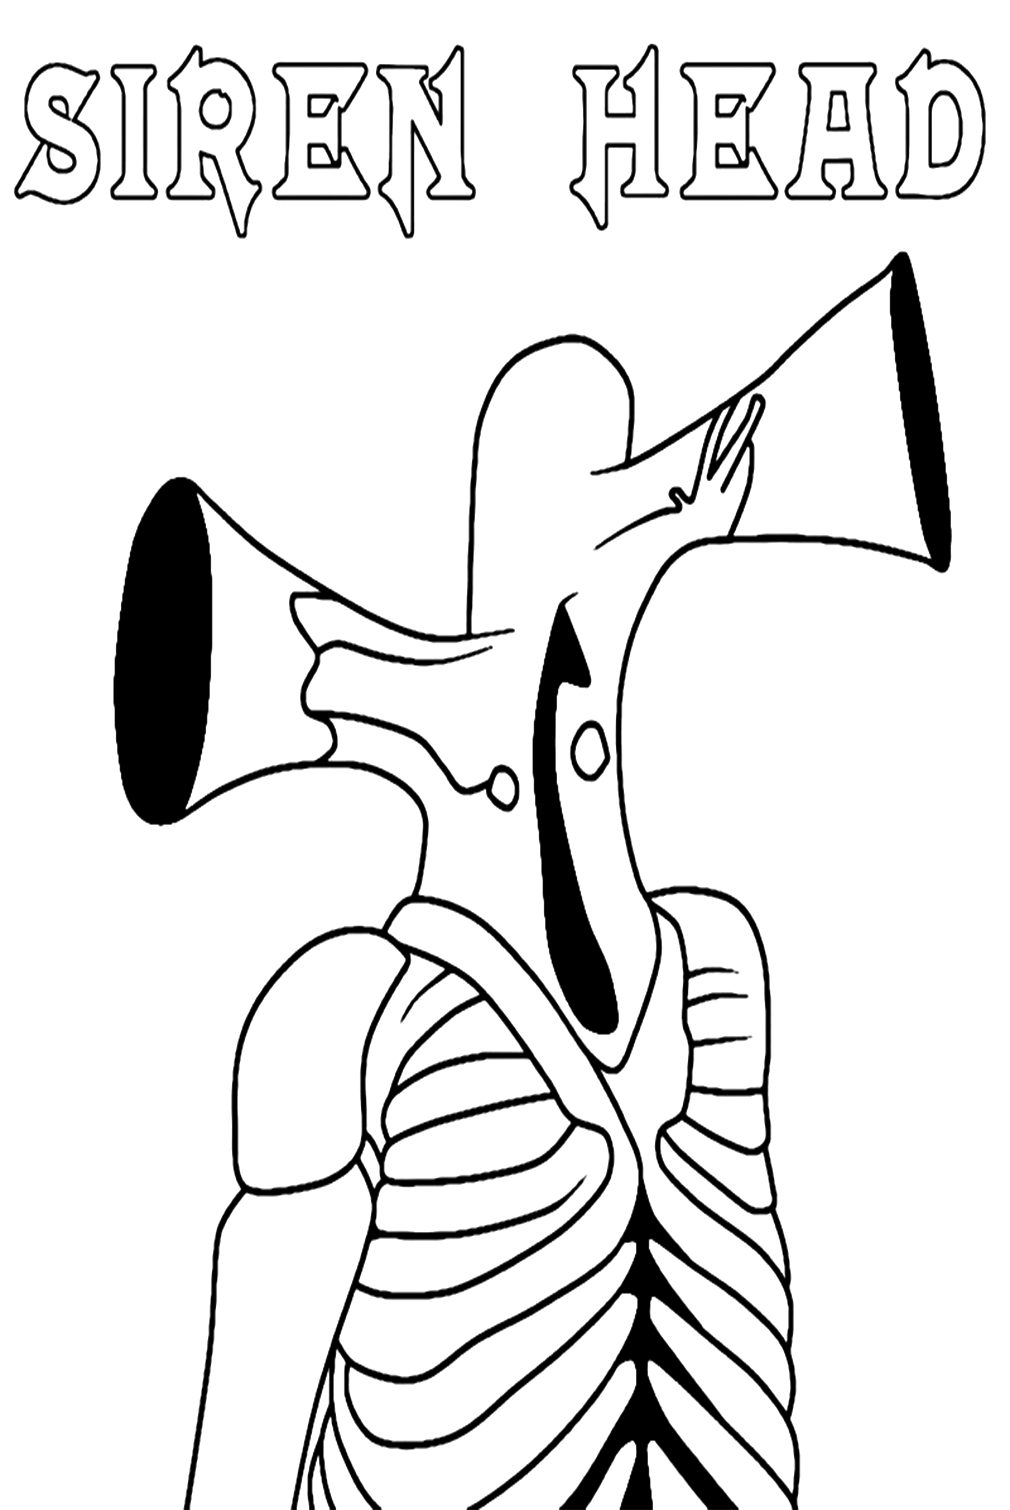 Siren Head Image Coloring Page